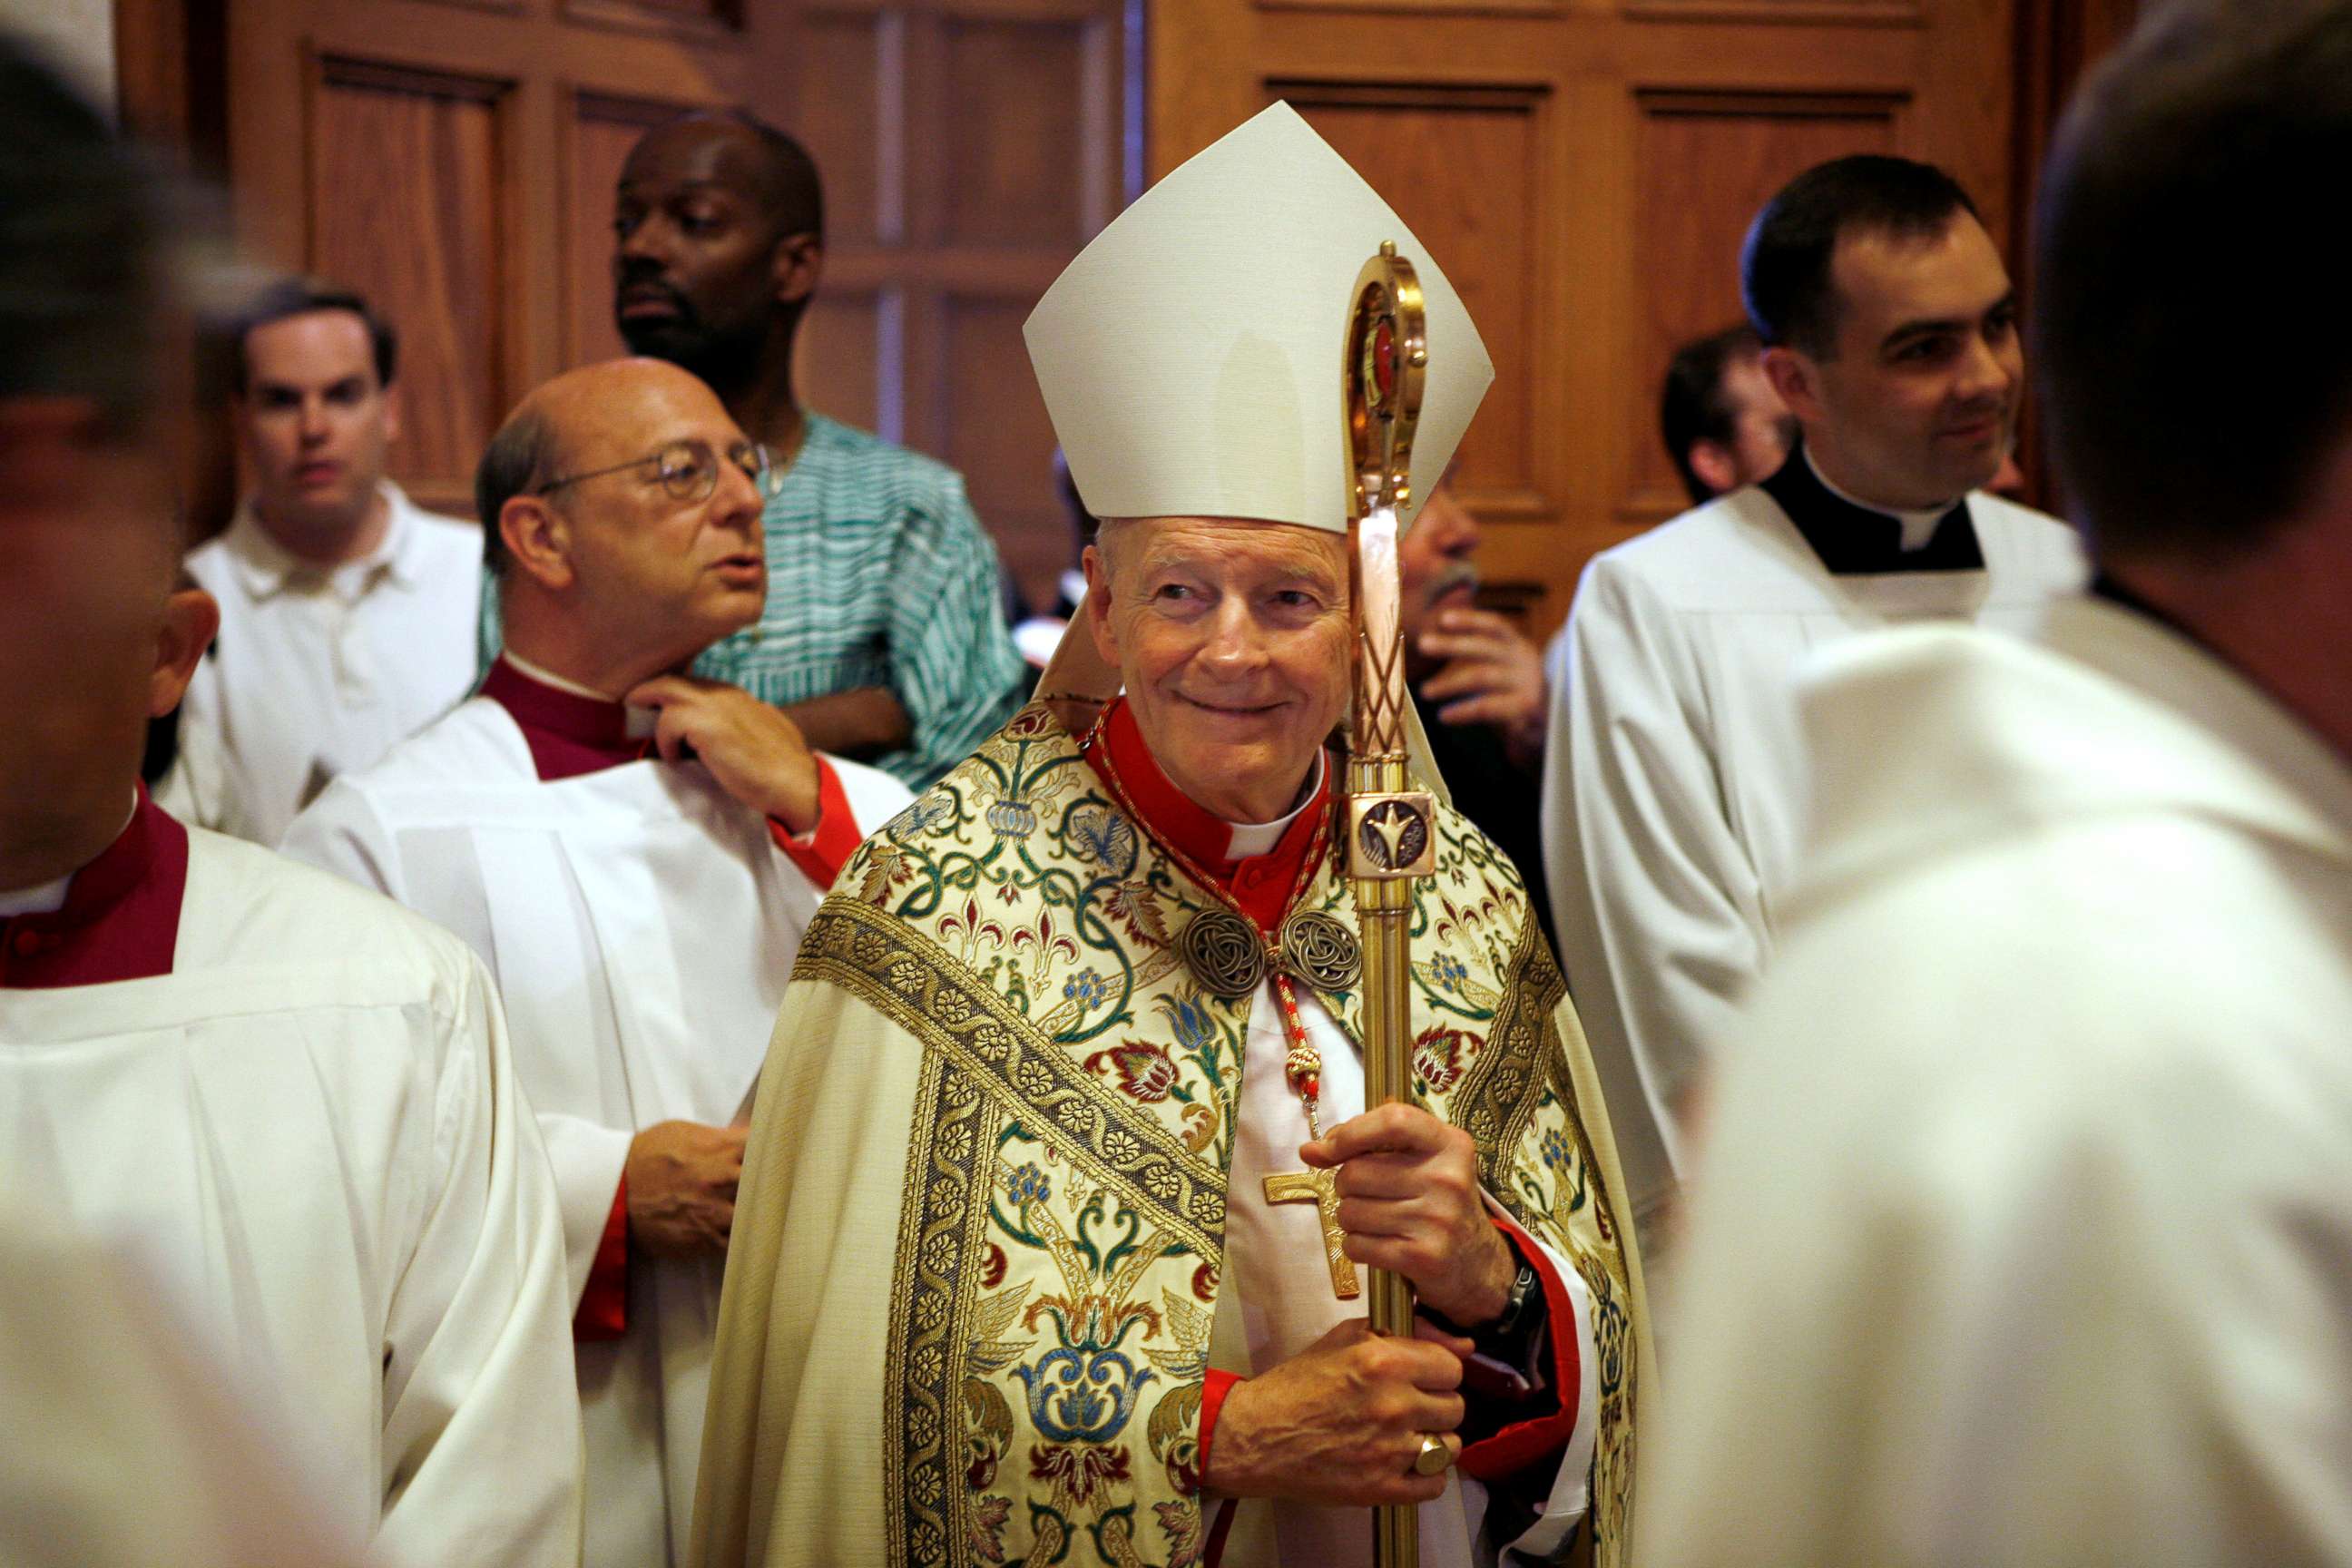 PHOTO: Retired Cardinal Theodore McCarrick stands before the Mass of Installation for Archbishop Donald Wuerl at the Basilica of the National Shrine of the Immaculate Conception Washington D.C., June 22, 2006. 